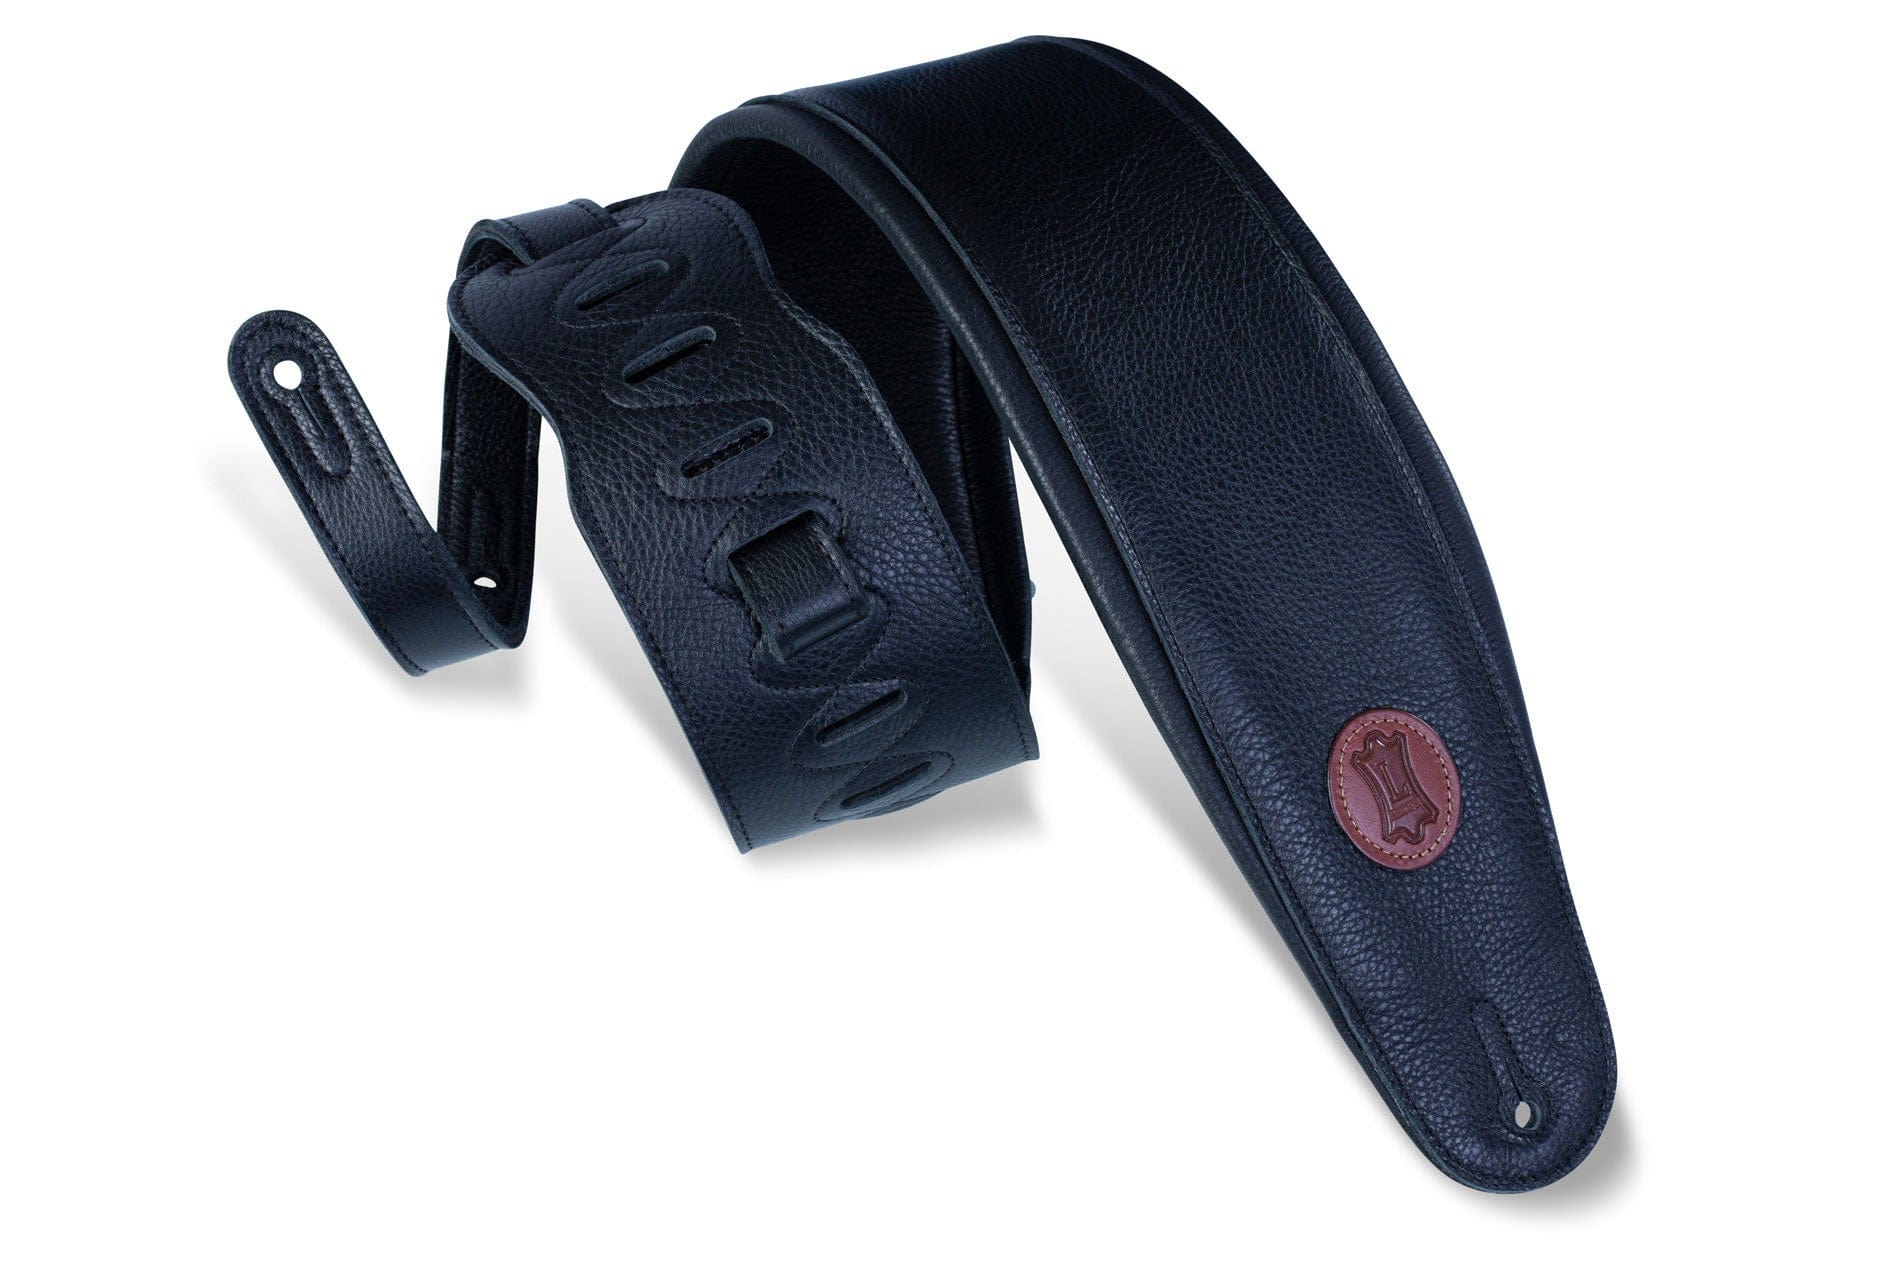 Levy's MSS2 4.5-inch Garment Leather with Heavy Padding Bass Strap